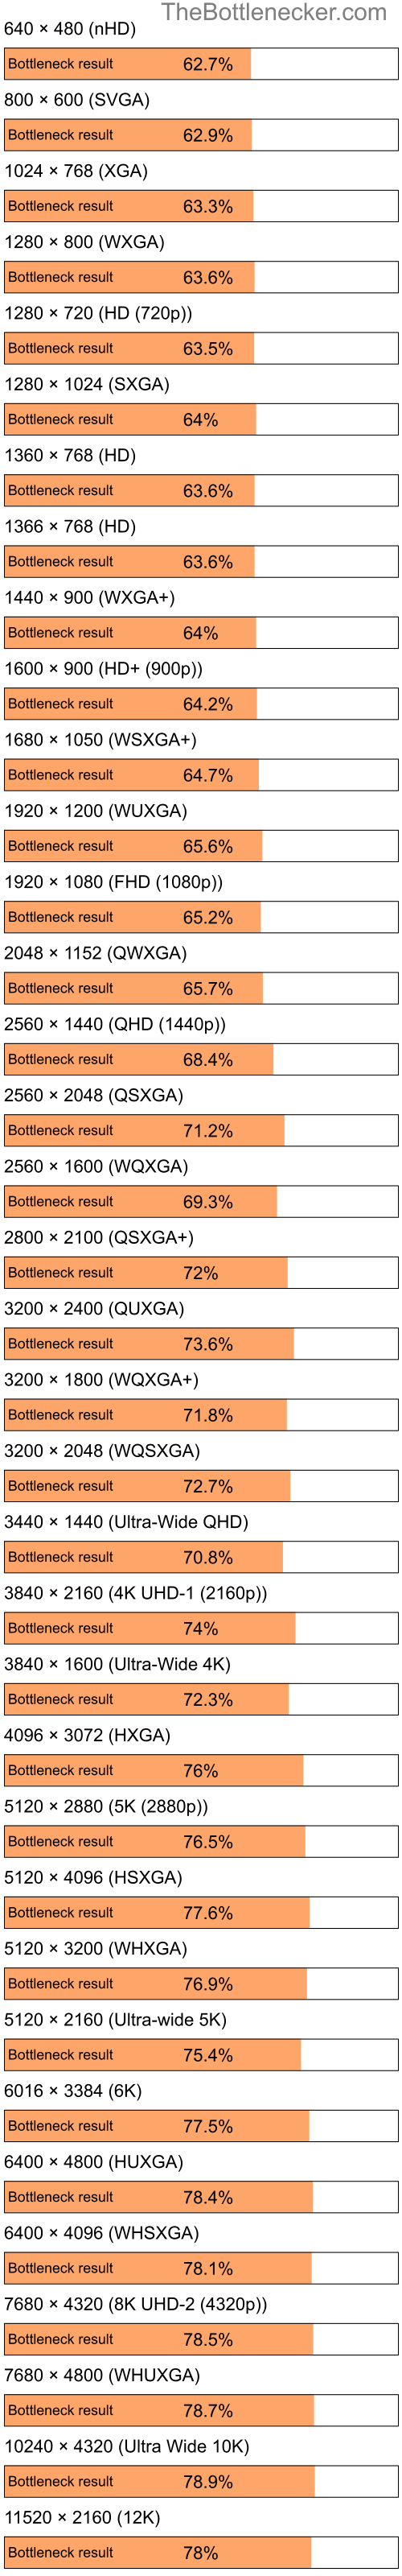 Bottleneck results by resolution for Intel Pentium 4 and NVIDIA GeForce G205M in General Tasks